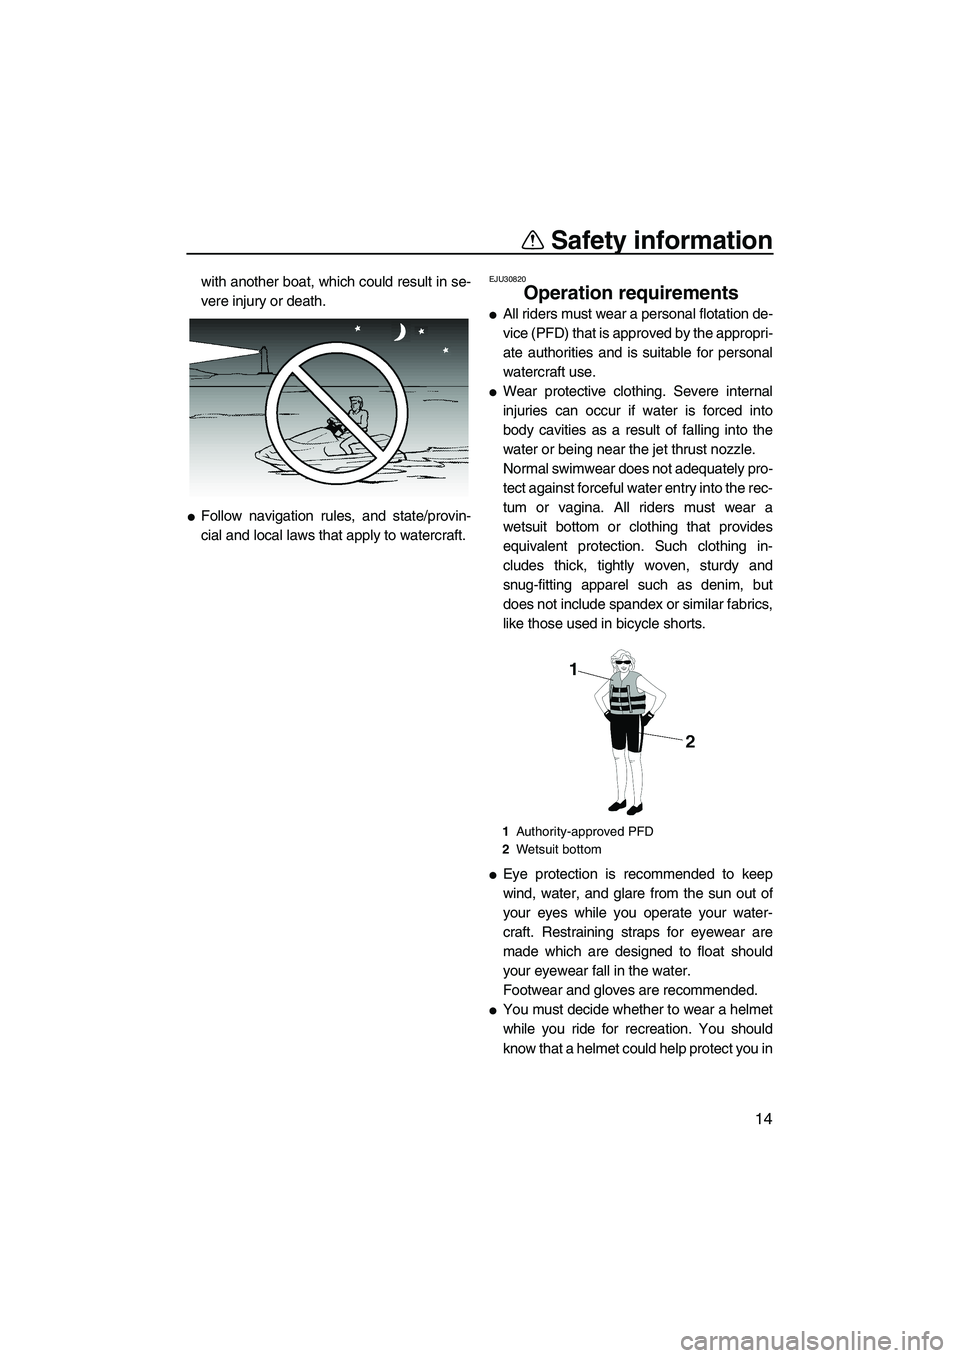 YAMAHA VX SPORT 2007 Owners Manual Safety information
14
with another boat, which could result in se-
vere injury or death.
Follow navigation rules, and state/provin-
cial and local laws that apply to watercraft.
EJU30820
Operation re